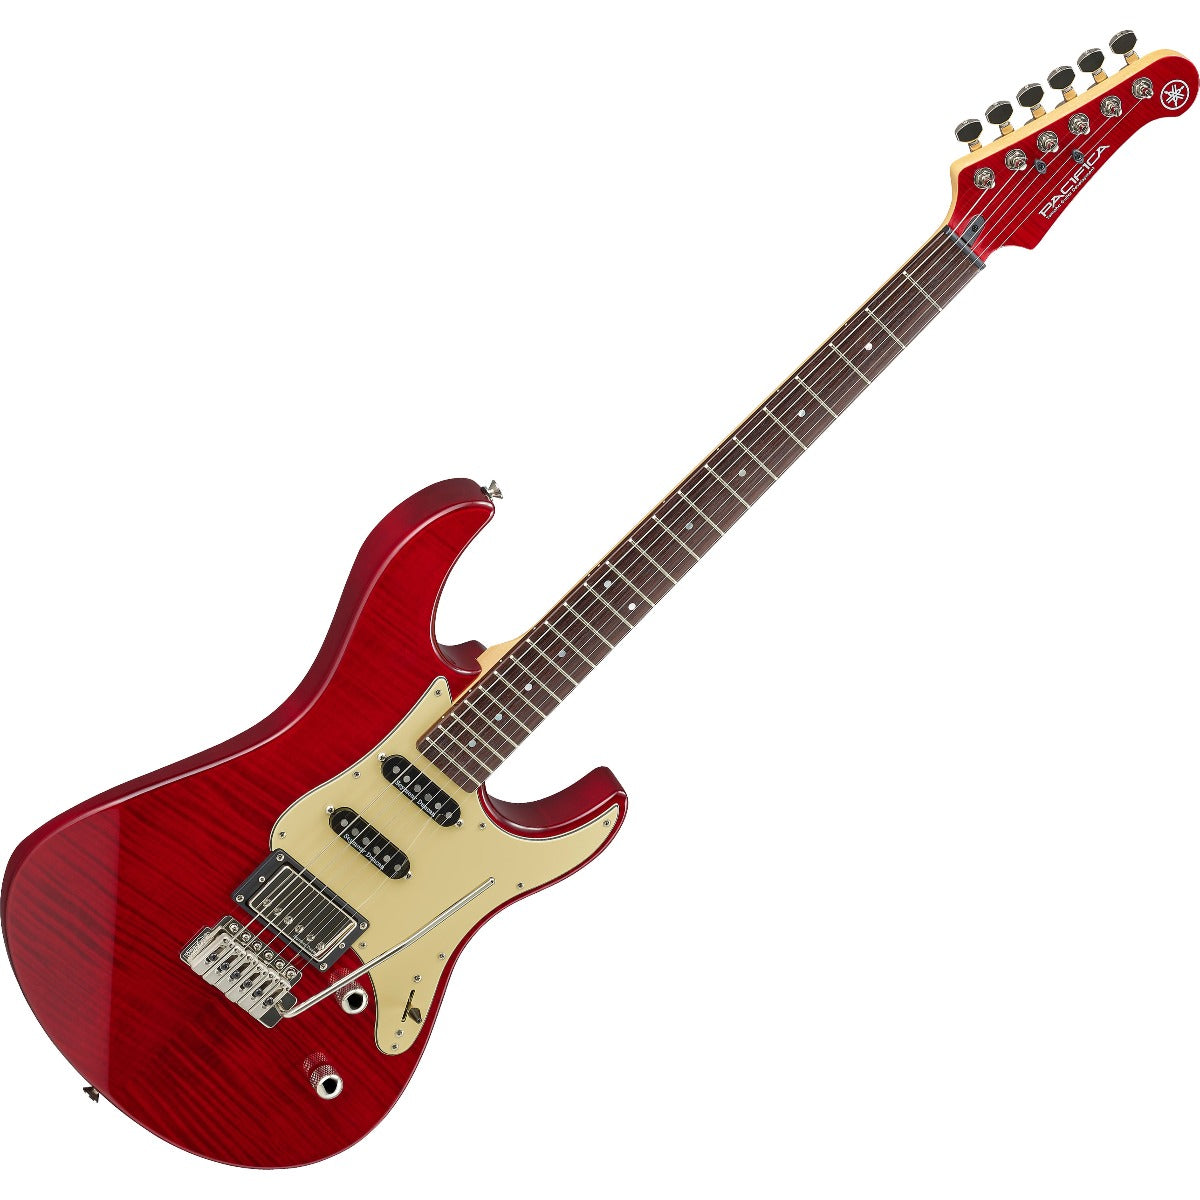 Yamaha Pacifica PAC612VIIFMX Electric Guitar - Red PERFORMER PAK